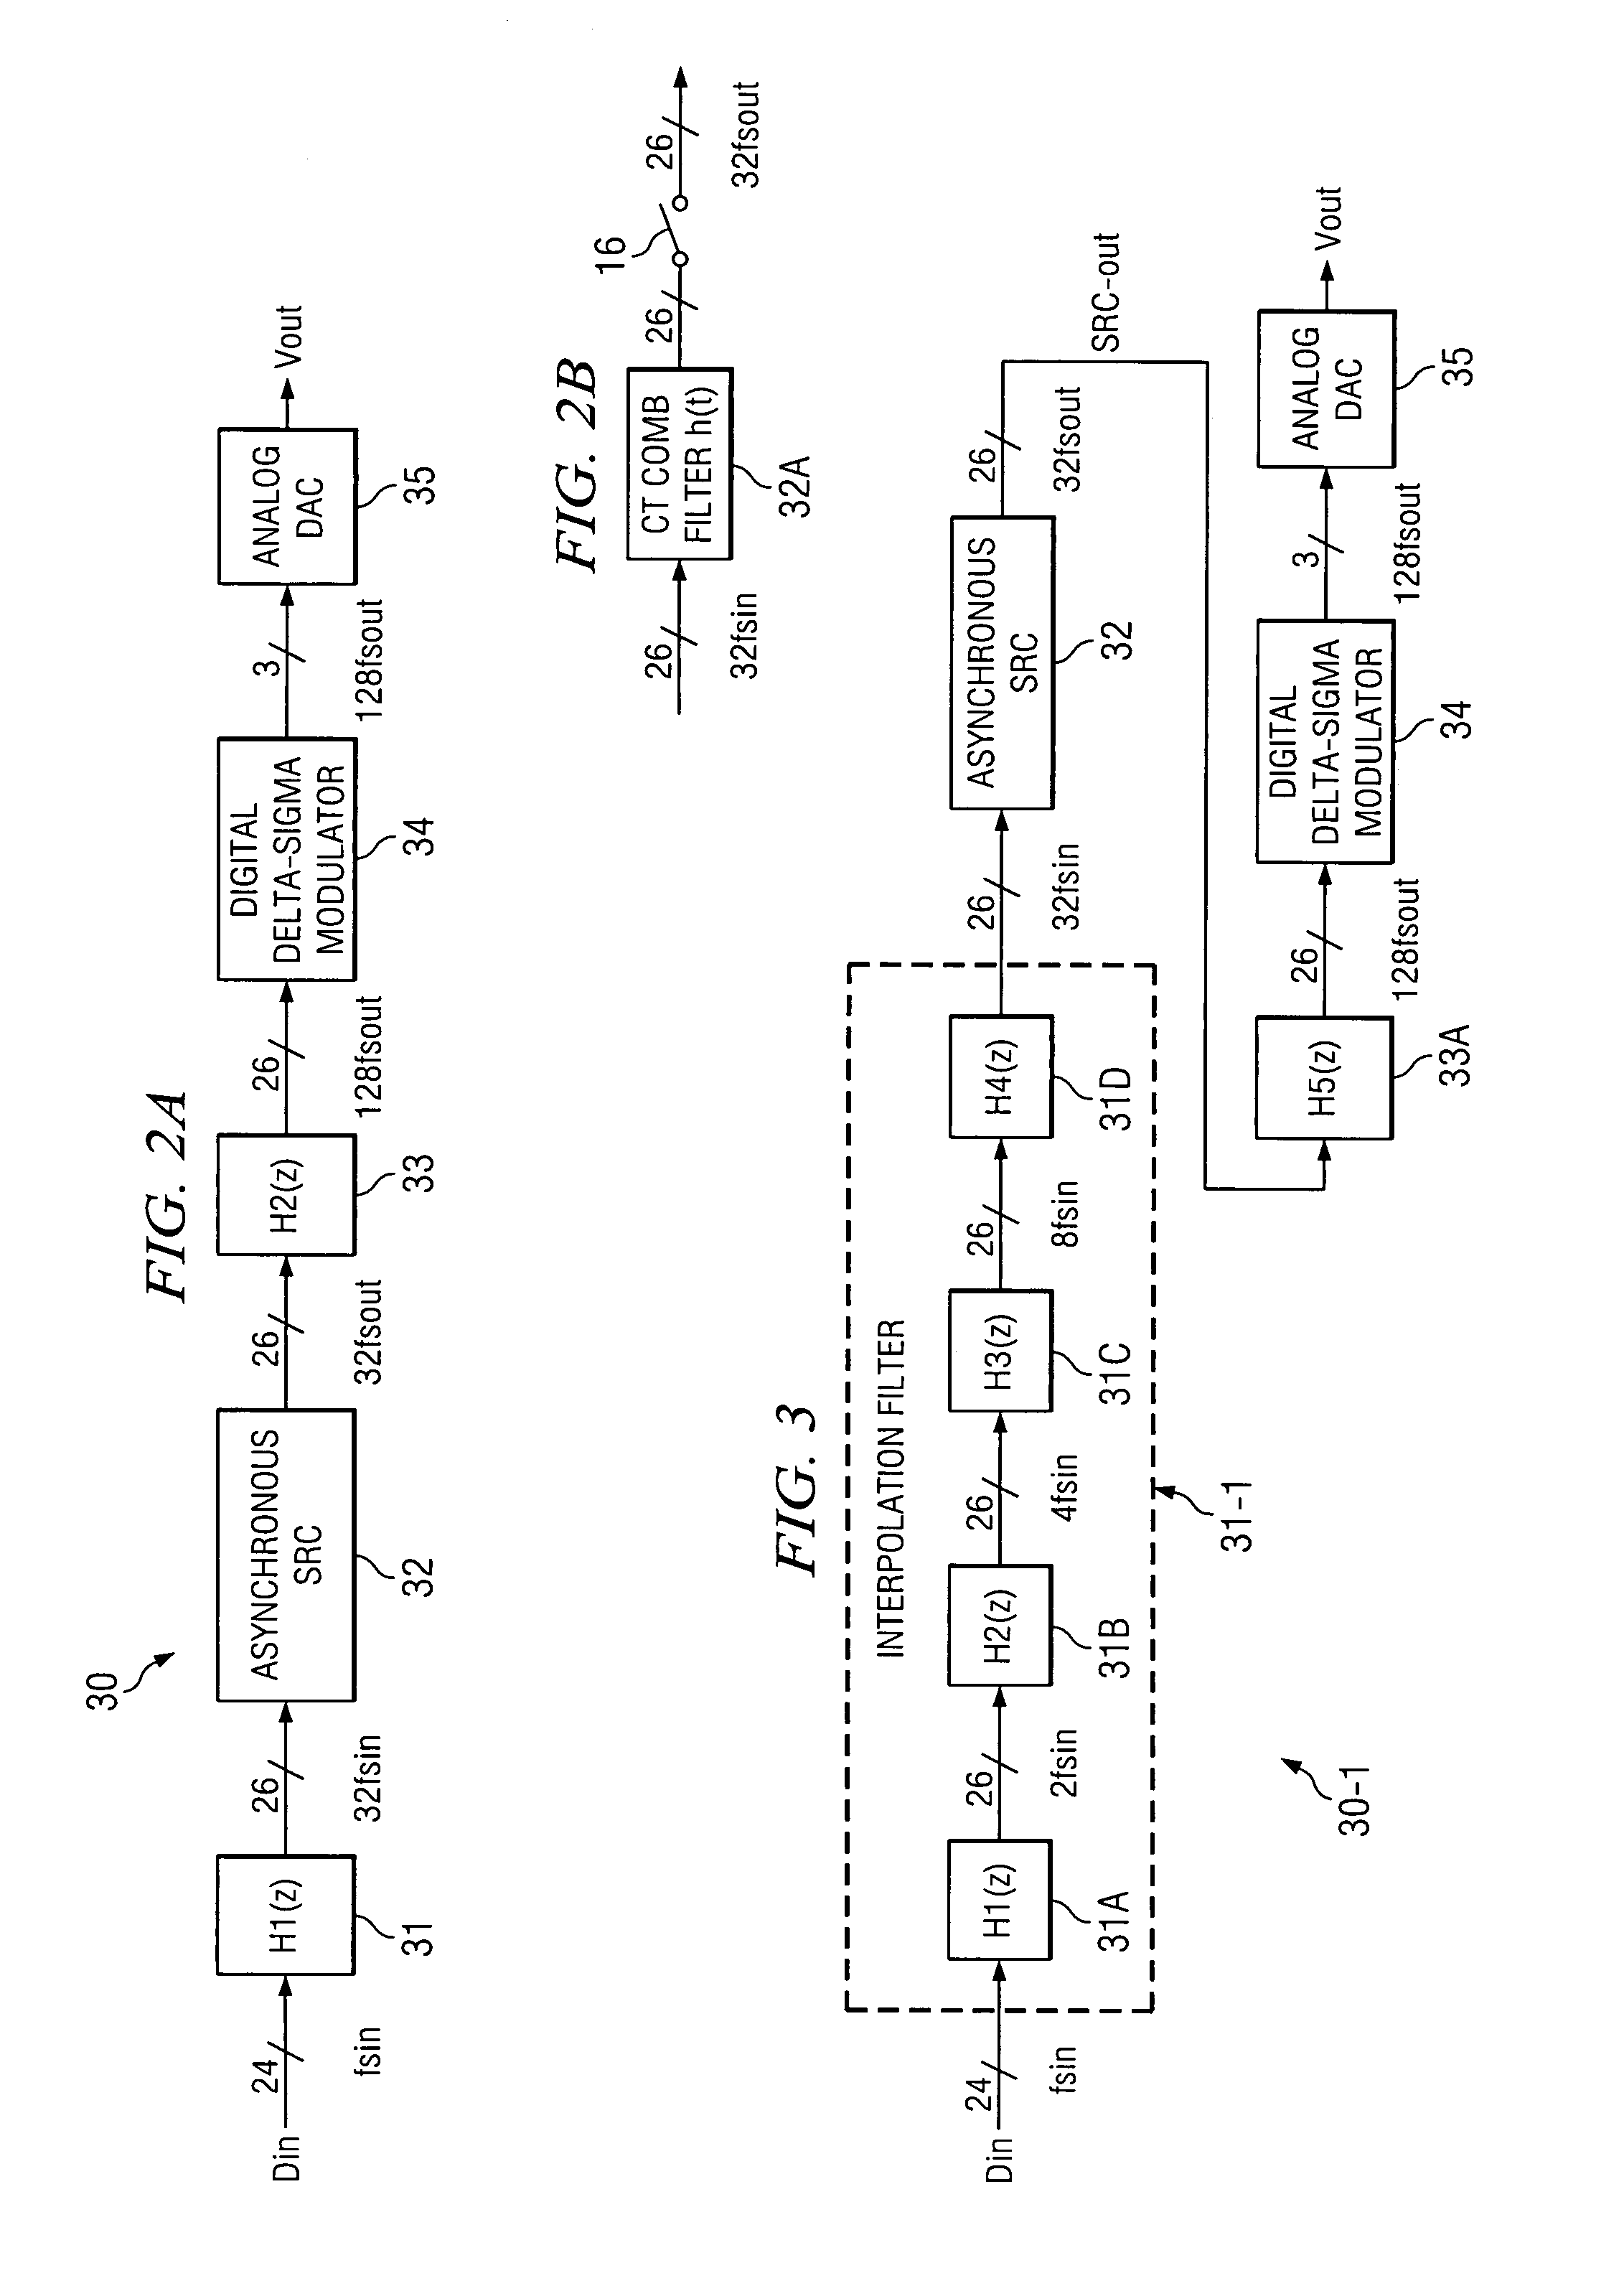 Asynchronous sampling rate converter and method for audio DAC